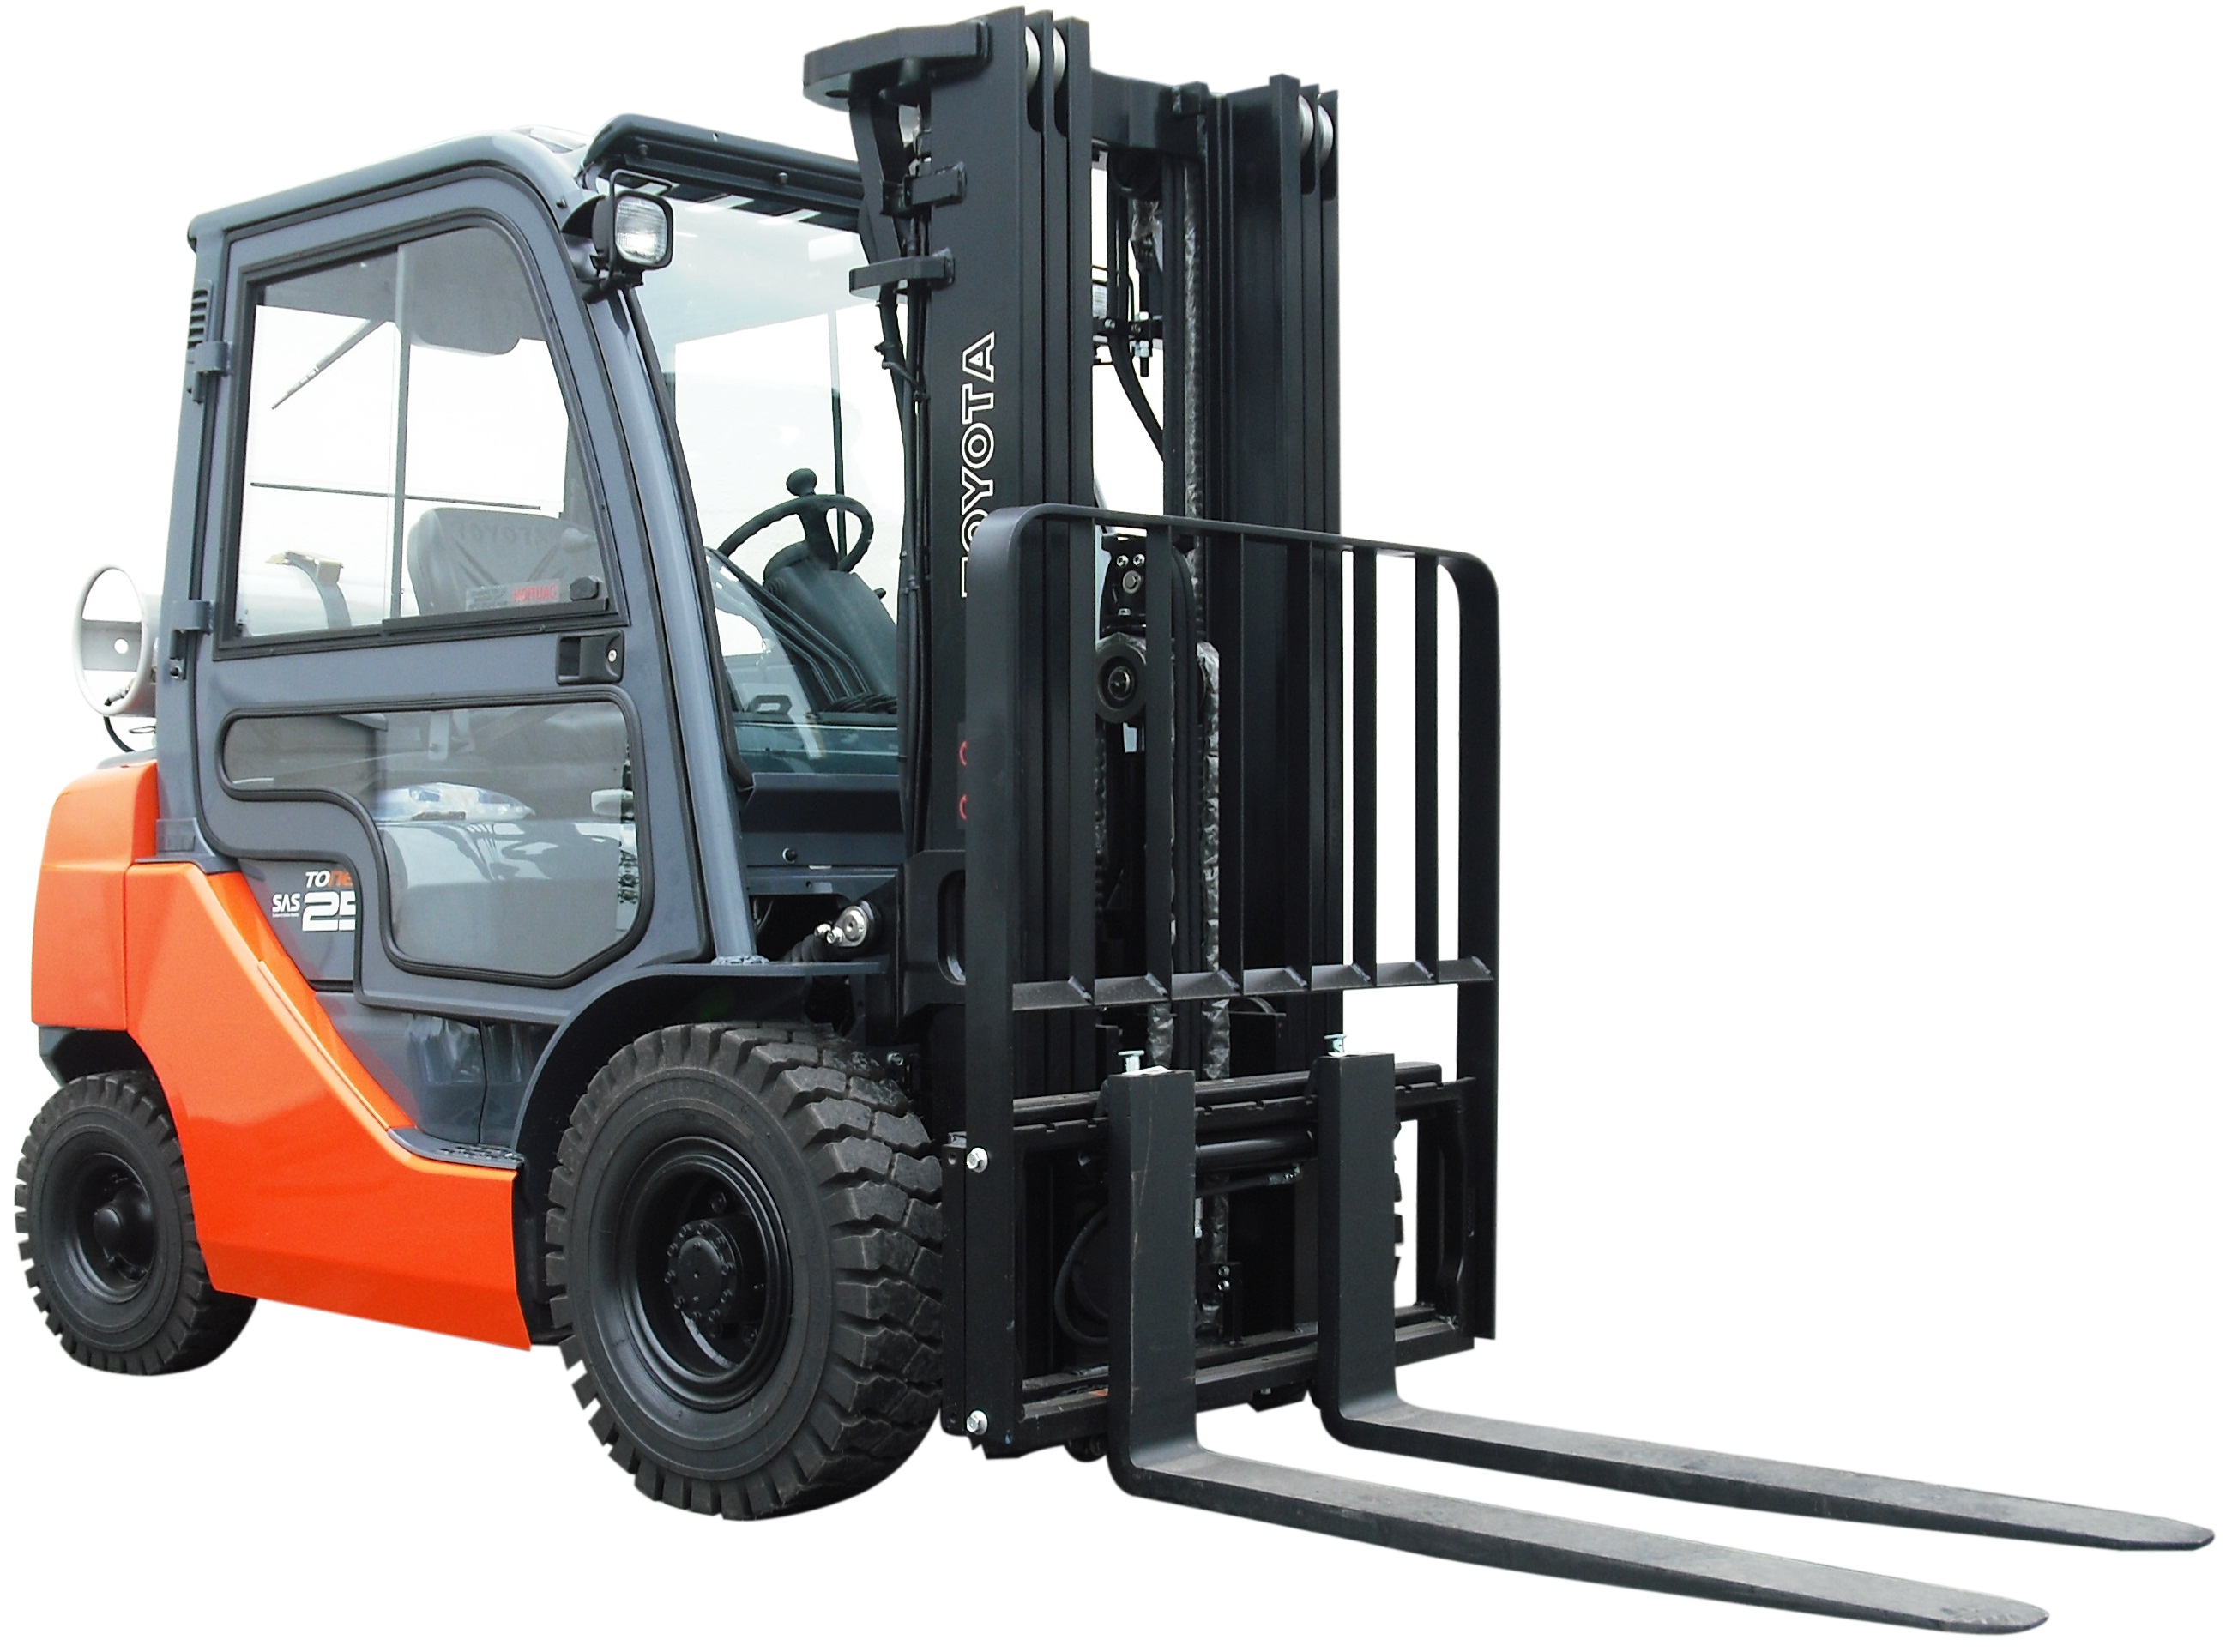 Toyota Forklift Wallpapers Vehicles Hq Toyota Forklift Pictures 4k Wallpapers 2019